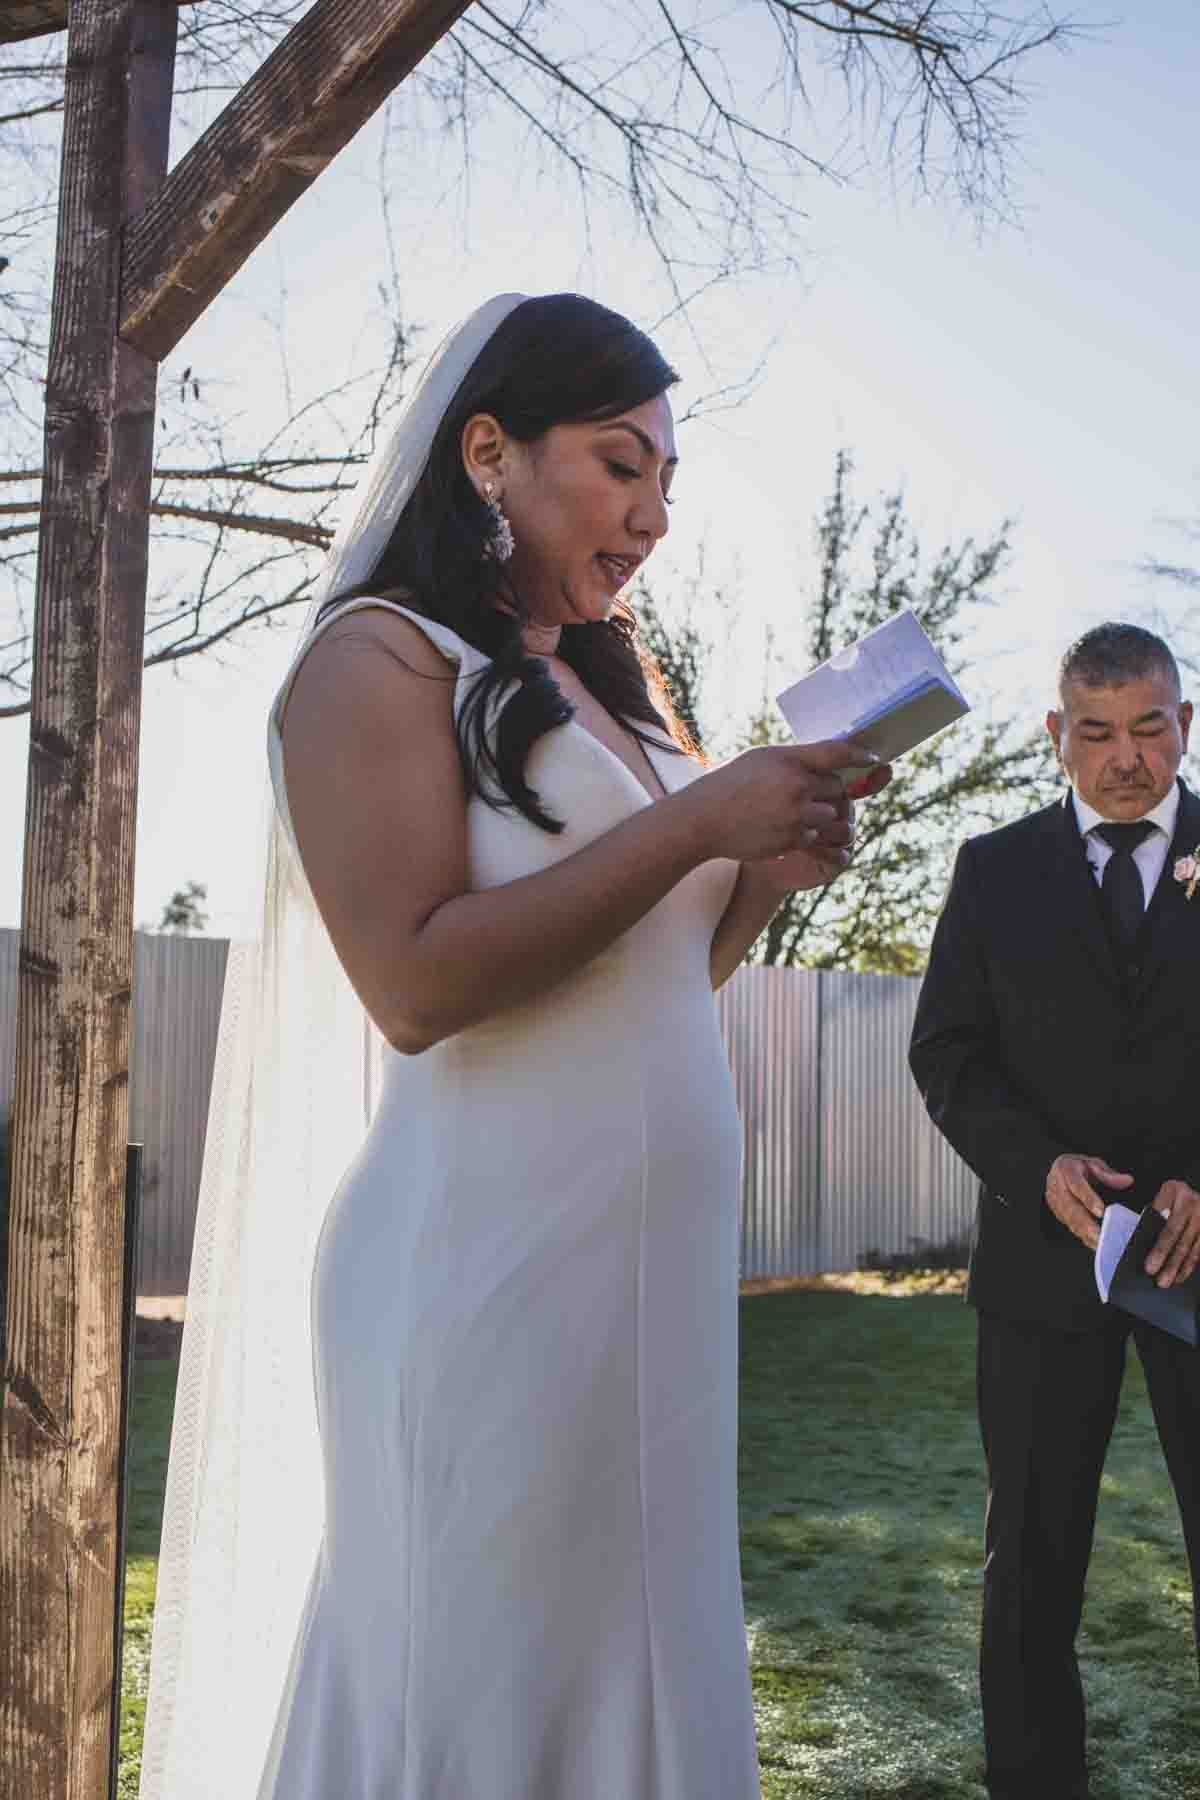  Bride reads her vows at Mexican Cowboy / Vaquero Farm Wedding at the Big Red Barn wedding at Schnepf Farms in Queen Creek, Arizona by Arizona based Photographer, Jennifer Lind Schutsky. 